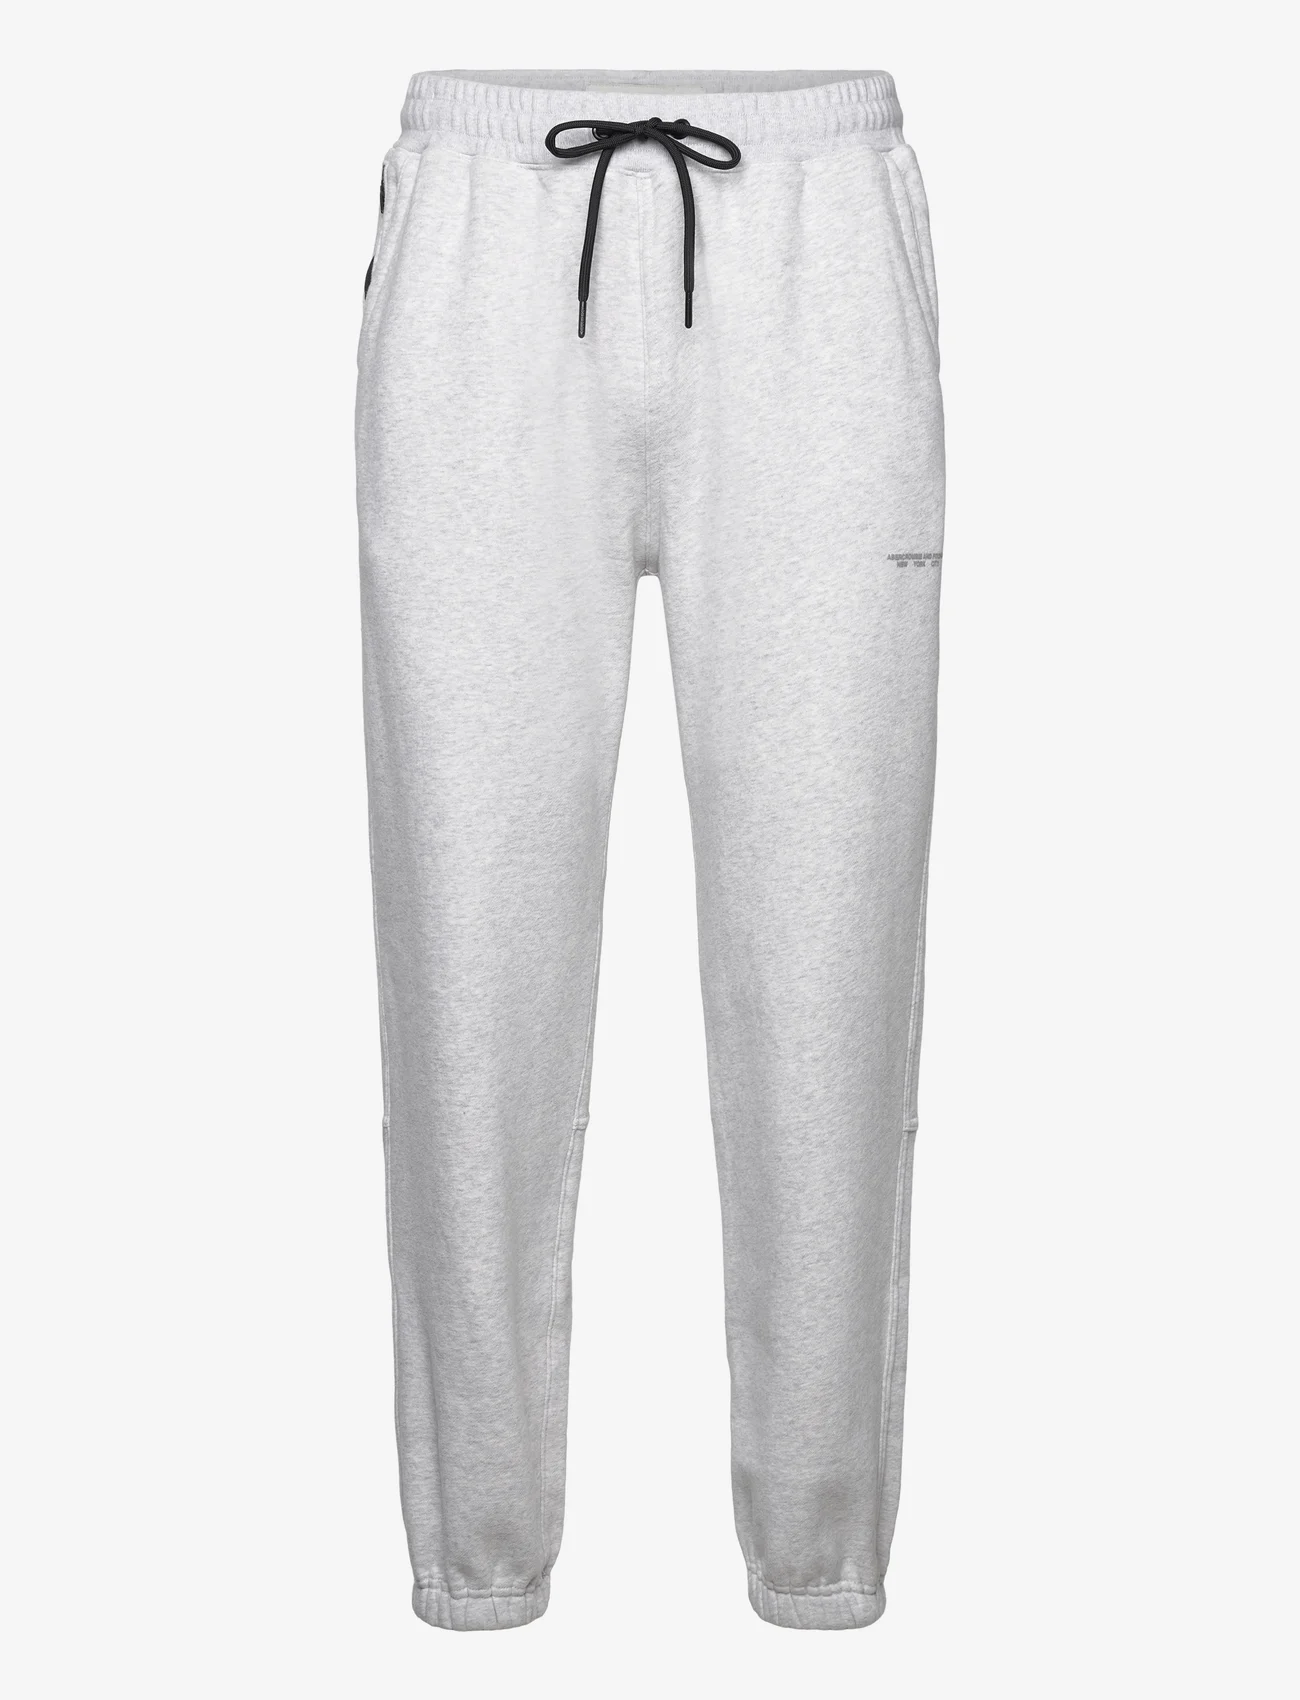 Abercrombie & Fitch - ANF MENS SWEATPANTS - joggingbyxor - grey heather - 0